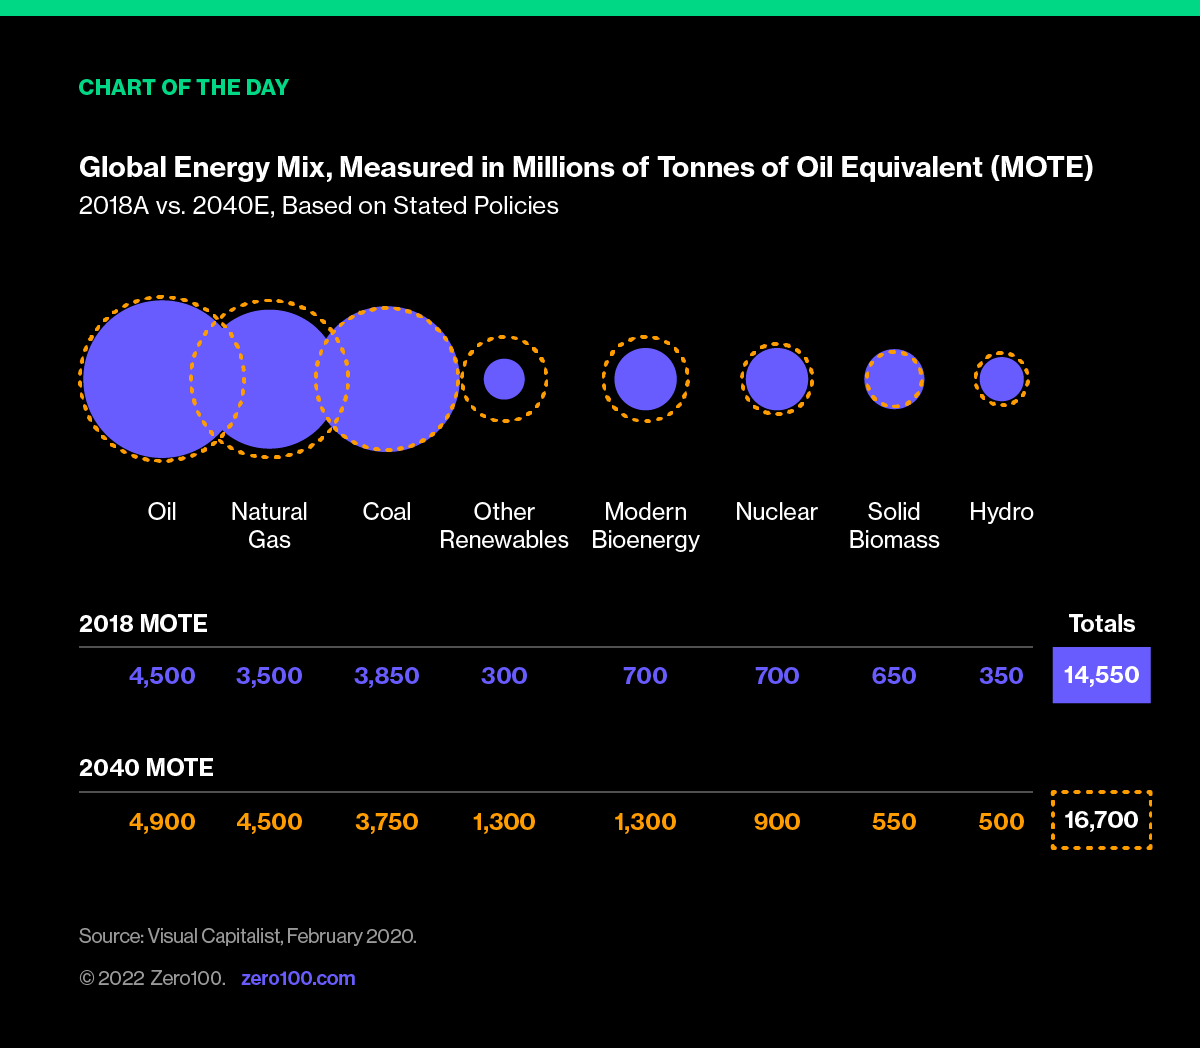 Chart depicting the global energy mis, measured in millions of tons of oil equivalent (MOTE). Source: Visual Capitalist, February 2020.